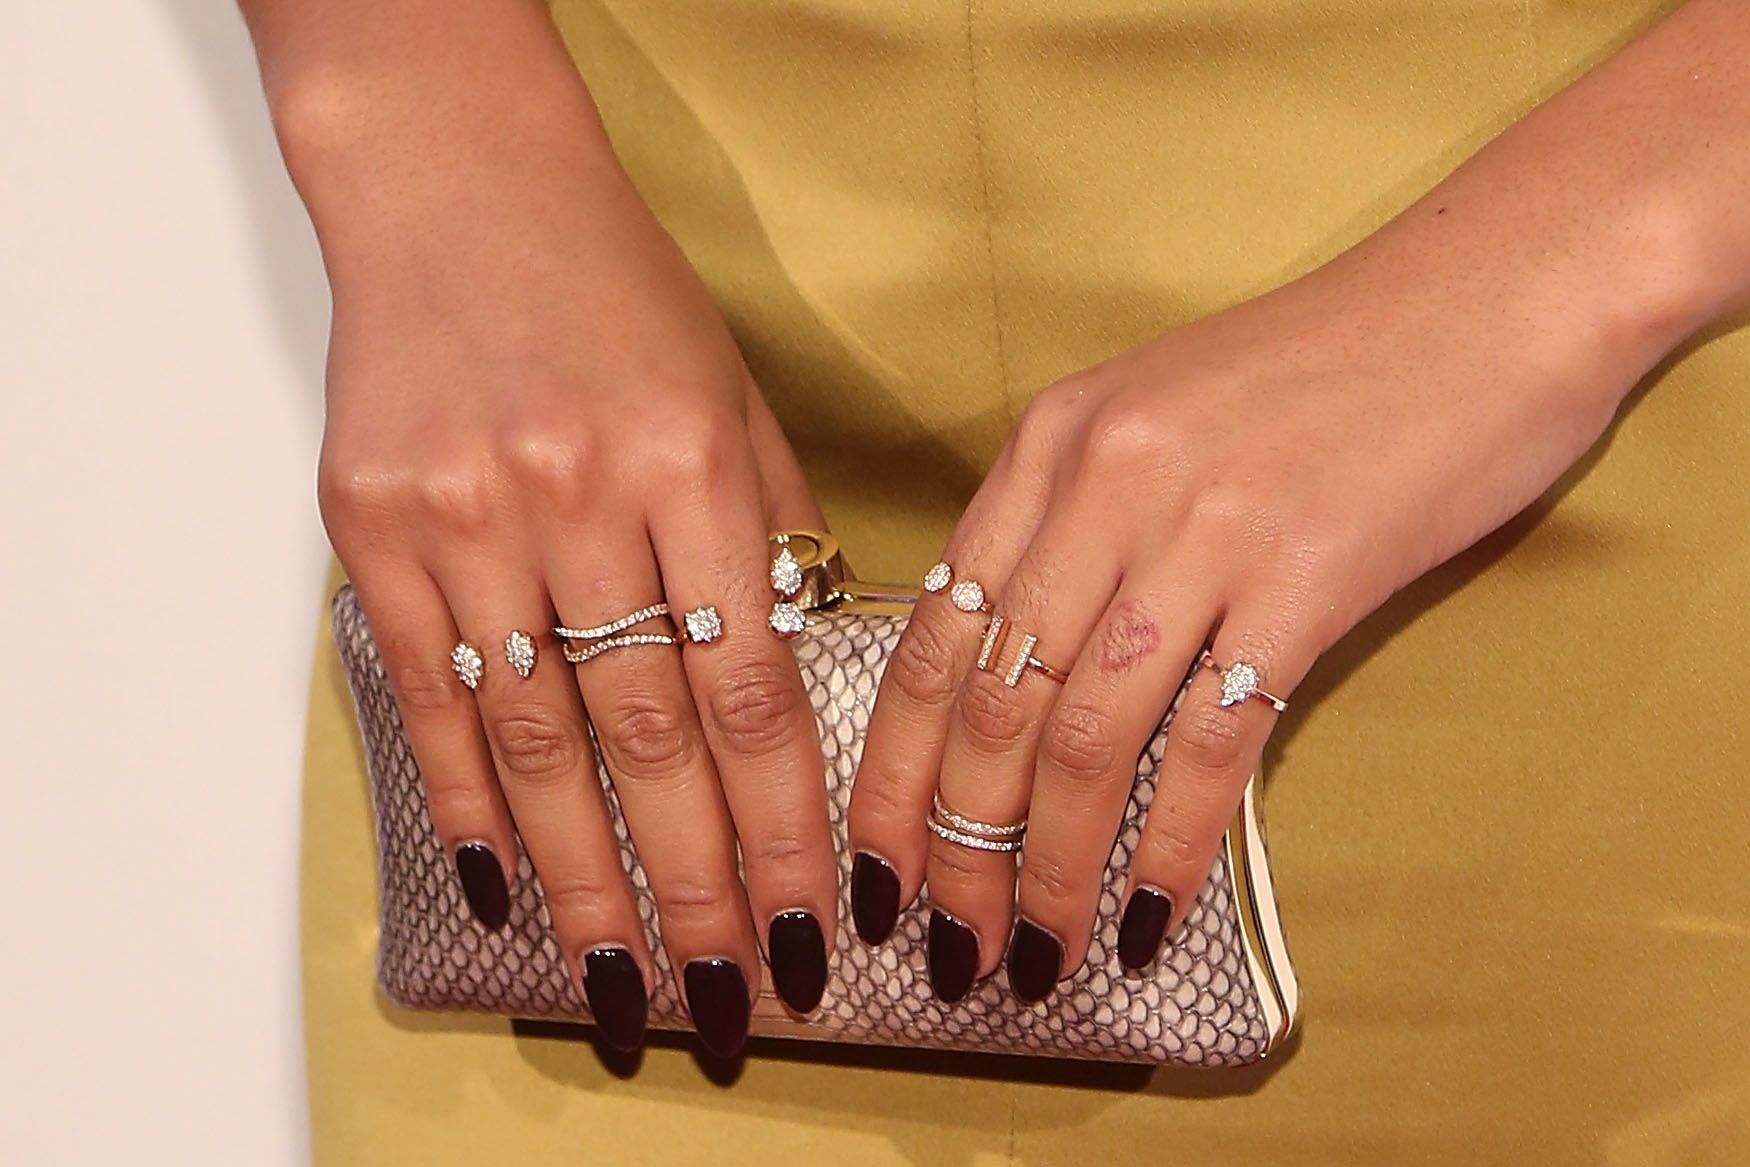 Press-on nails are back, and perfect for party season